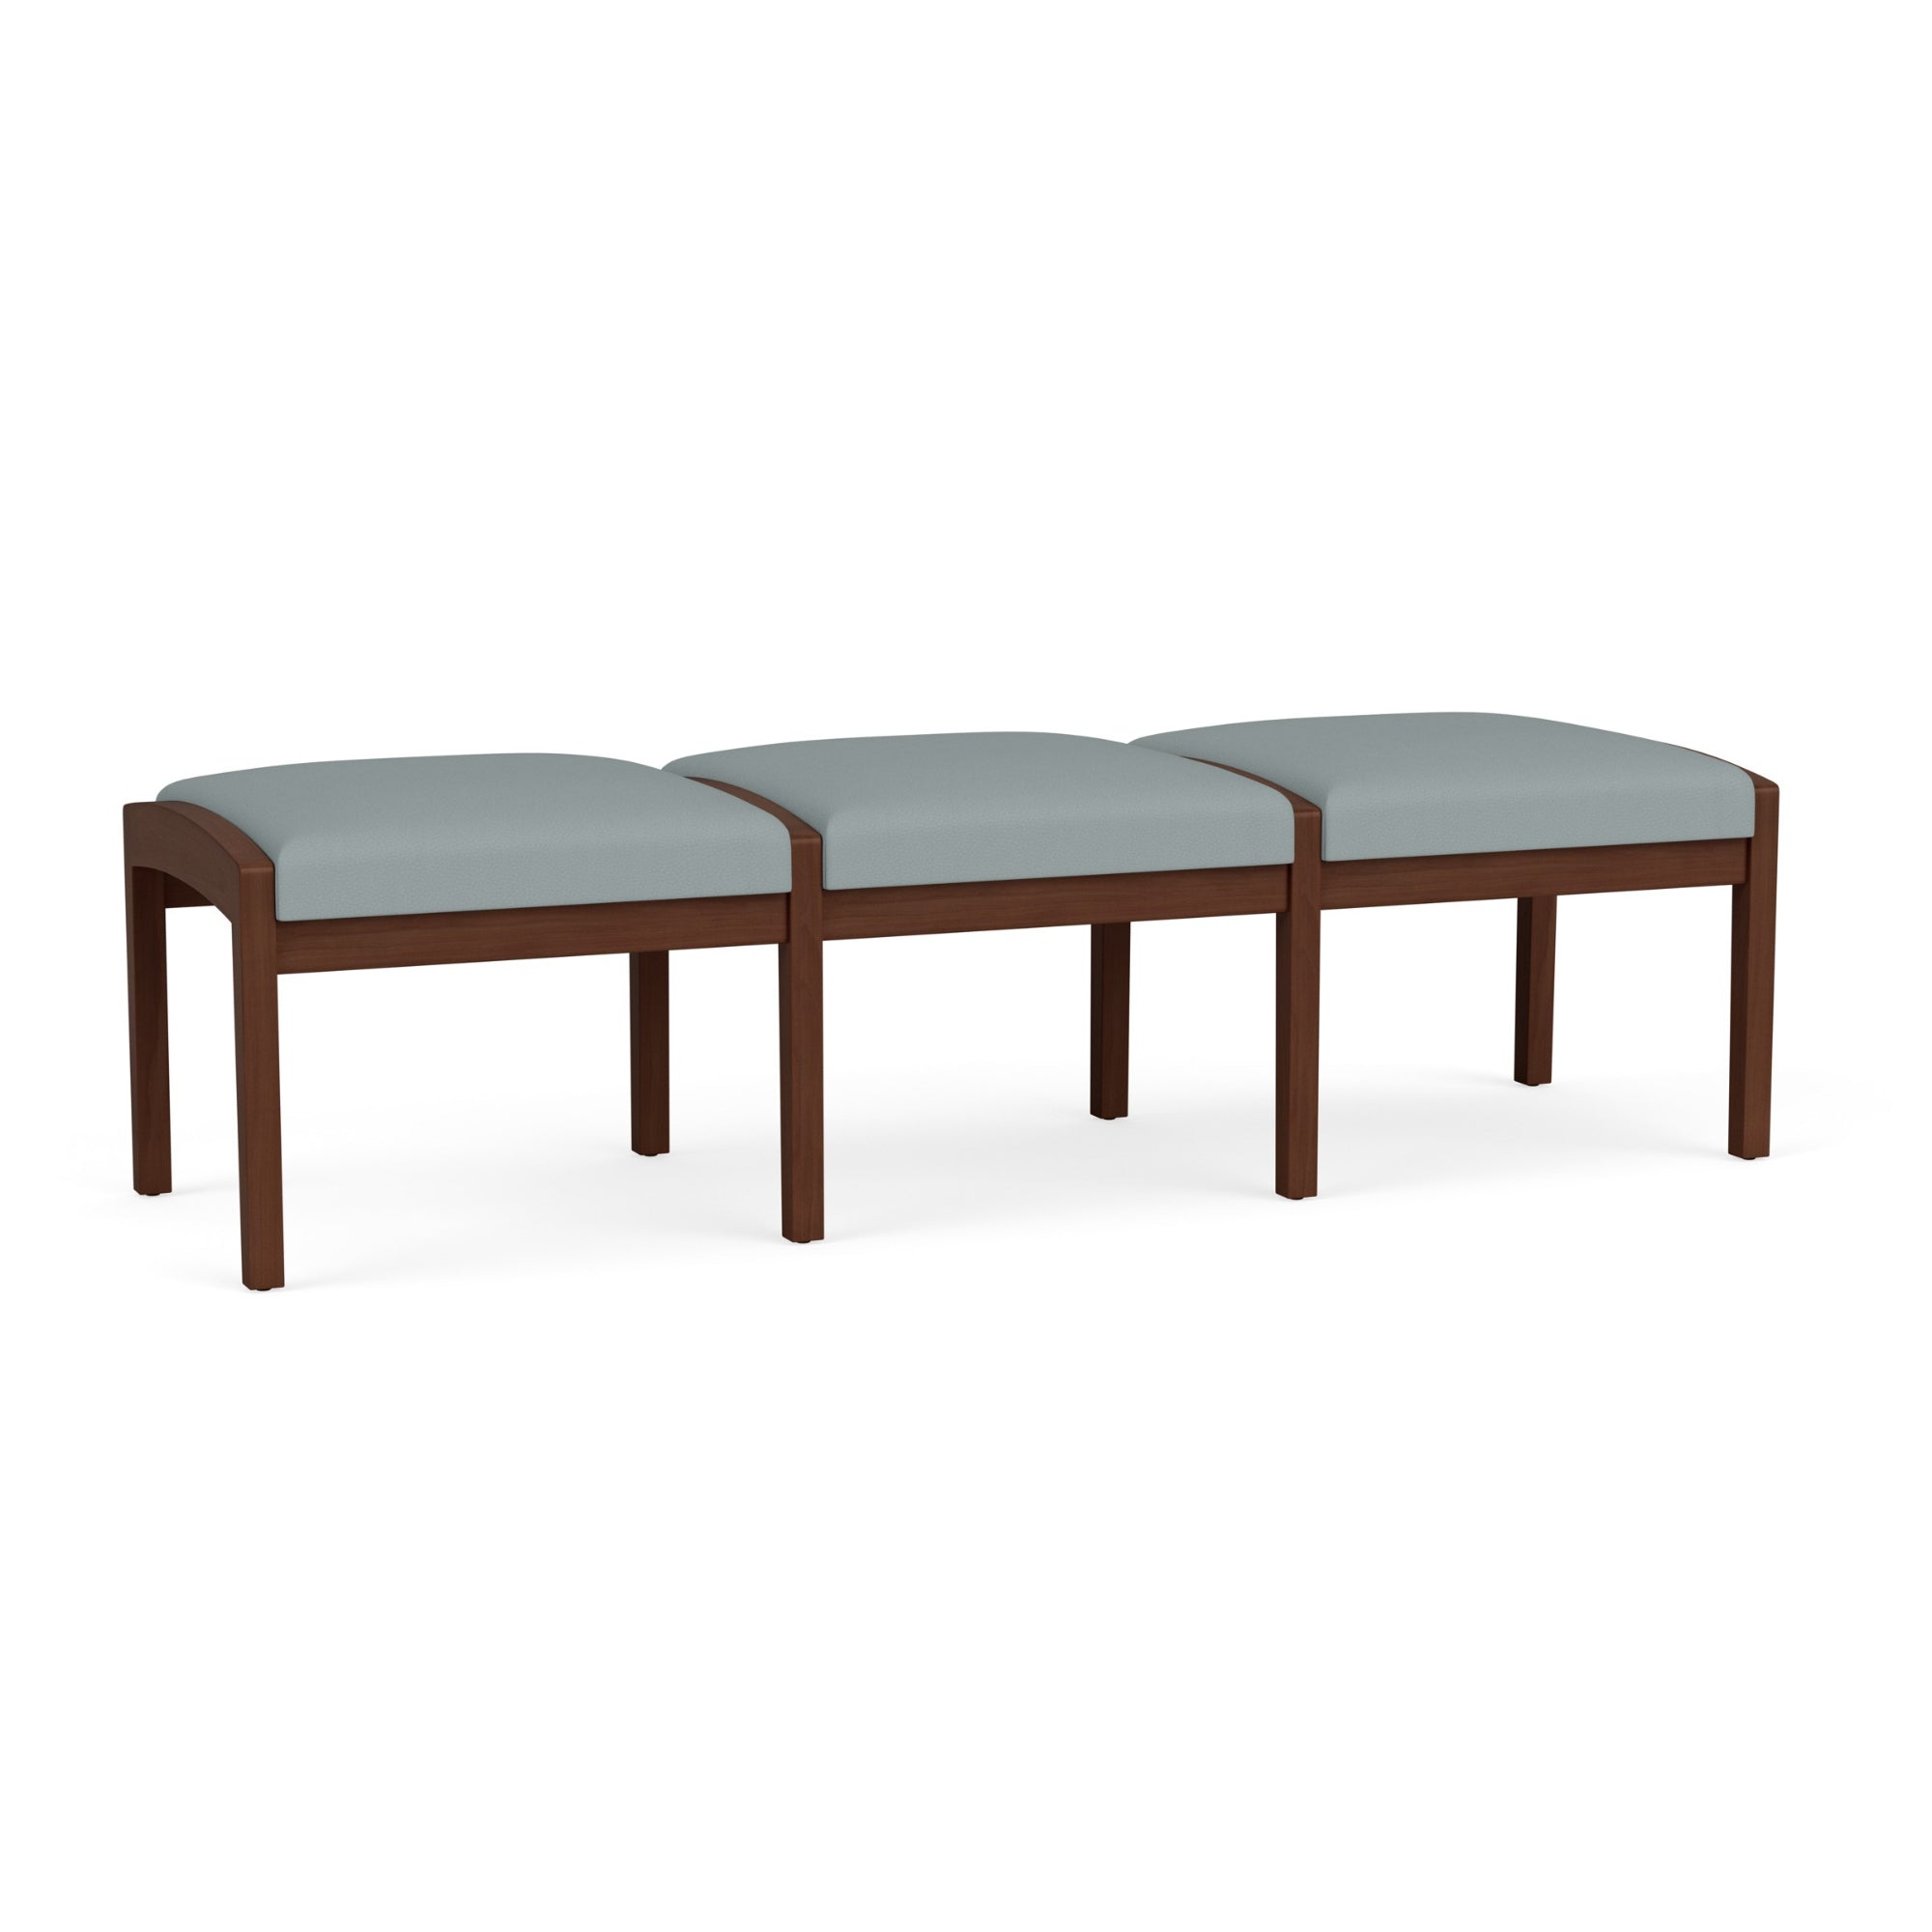 Lenox Wood Collection Reception Seating, 3 Seat Bench, Healthcare Vinyl Upholstery, FREE SHIPPING